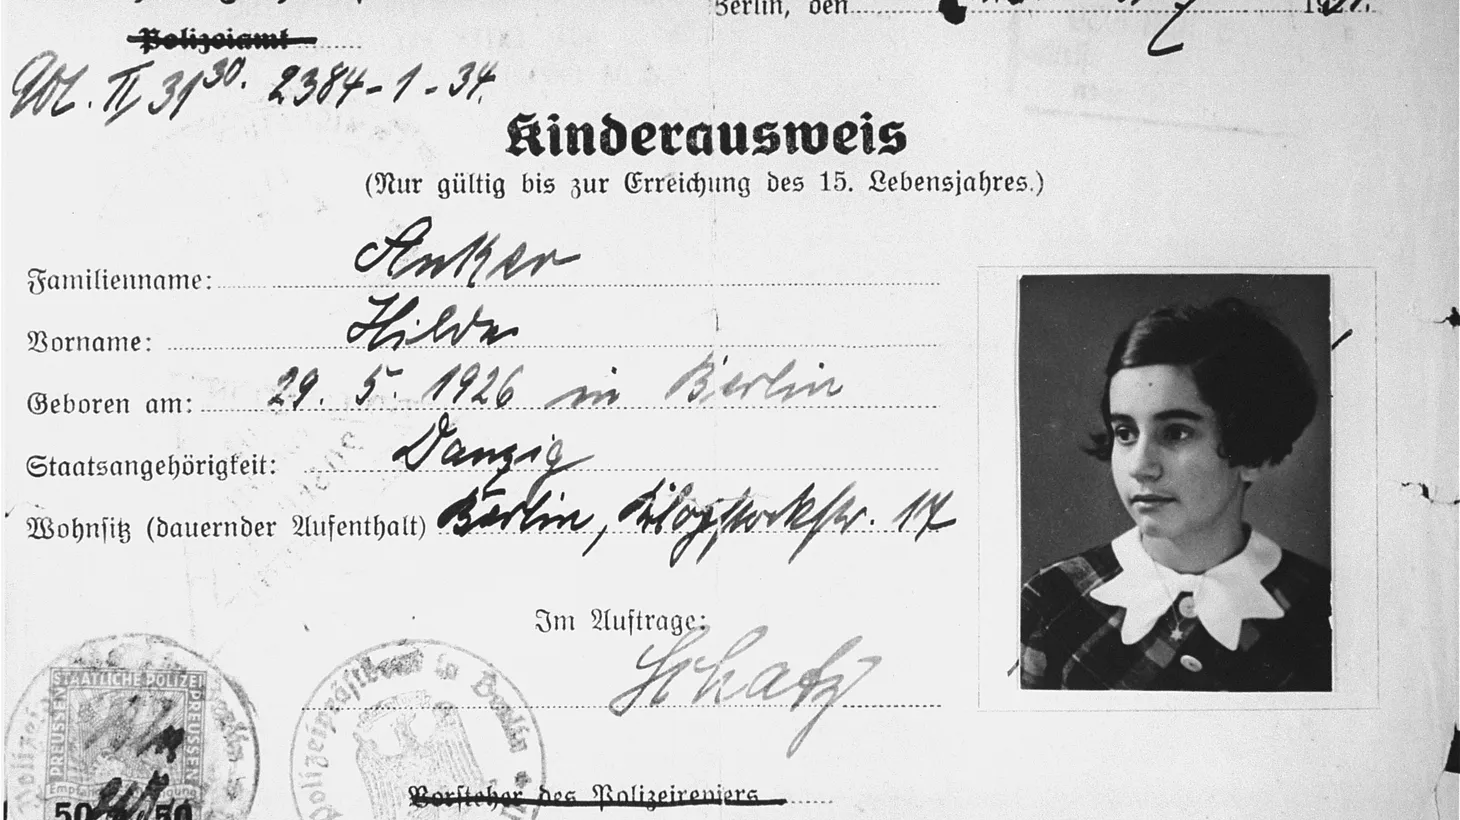 Hilda Fogelson, formerly Hilde Anker, received this German identification card in 1934. She used it when she fled on the Kindertransport to escape Nazi-occupied Germany.